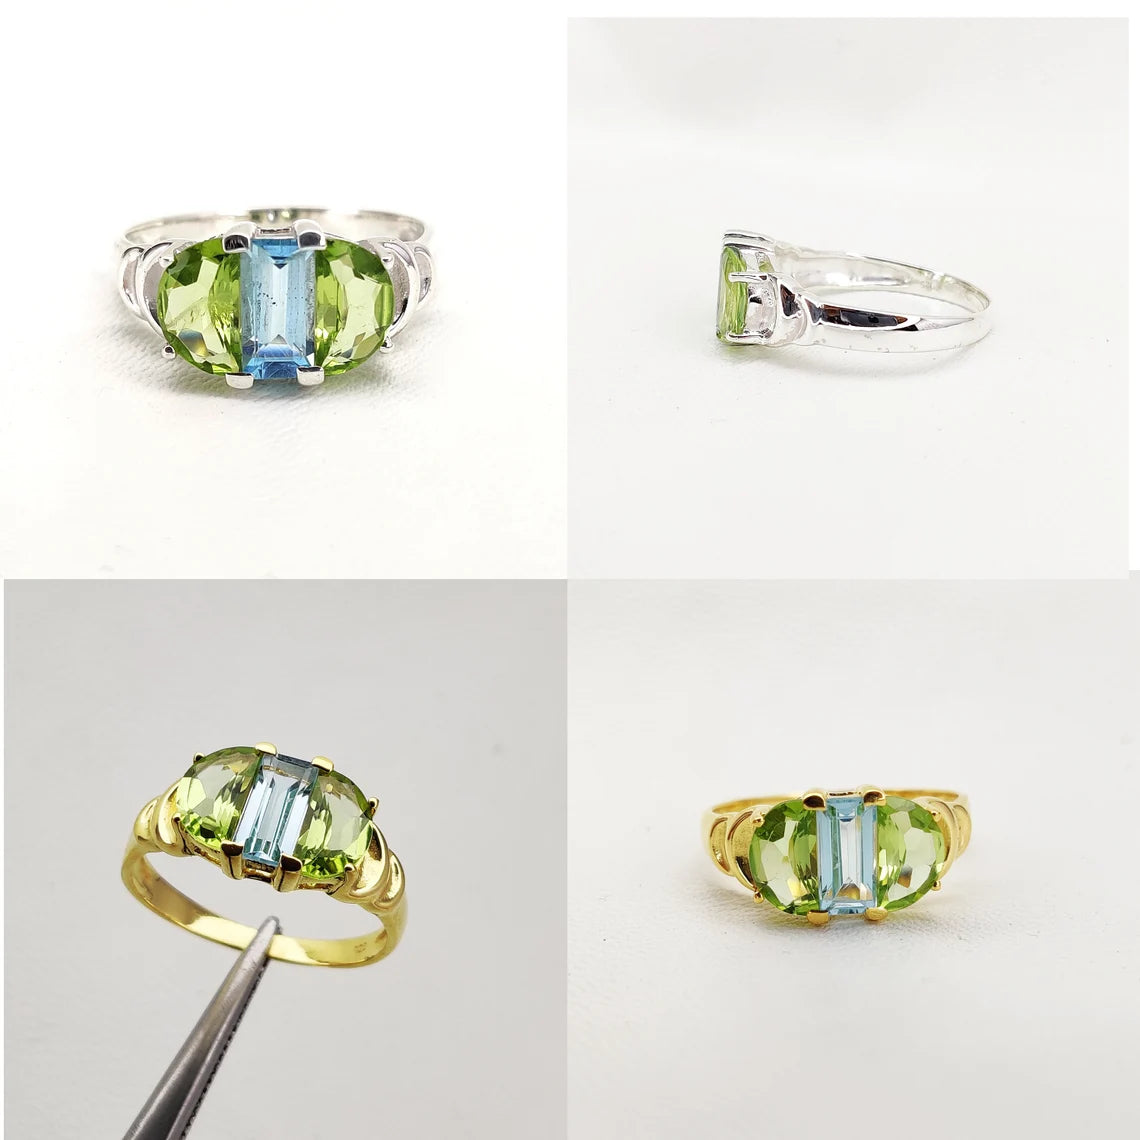 Blue Topaz Peridot Ring, Crescent Moon Ring, December August Birthstone, Unique Modern Ring, Sterling Silver, Gift For Her